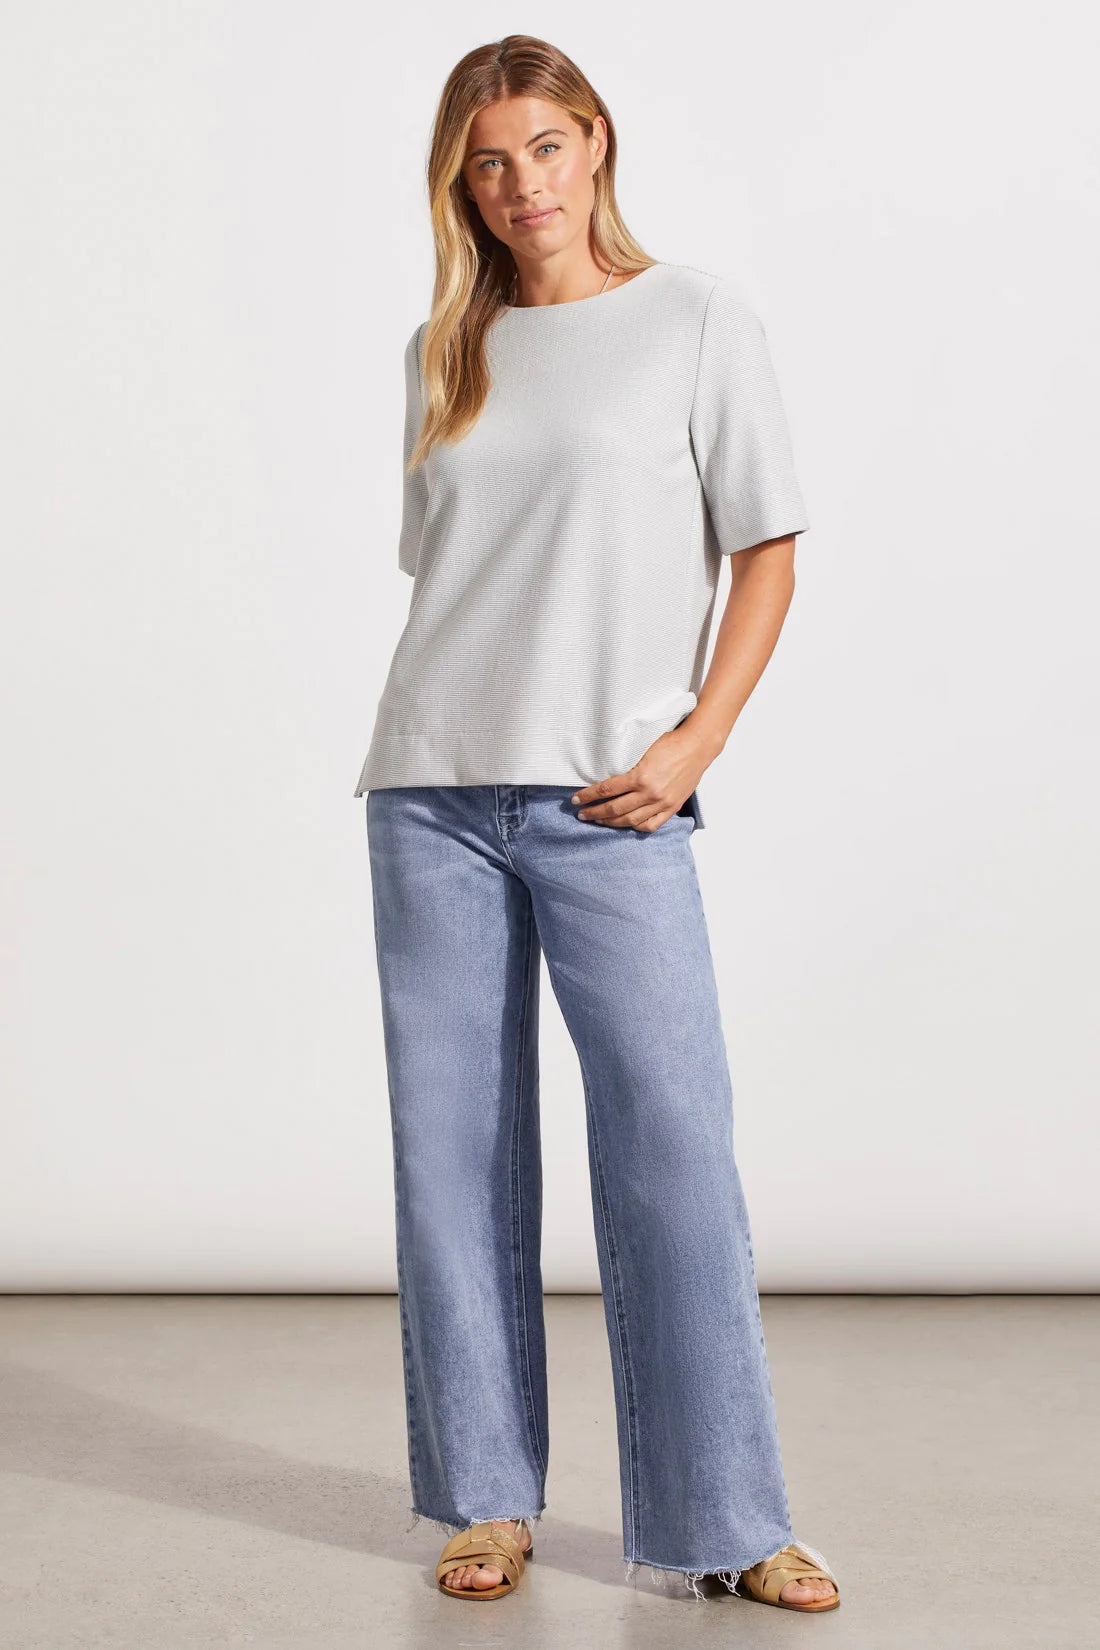 Ottoman knit fabric with a textured finish and two-way stretch delivers style-forward comfort to this top.